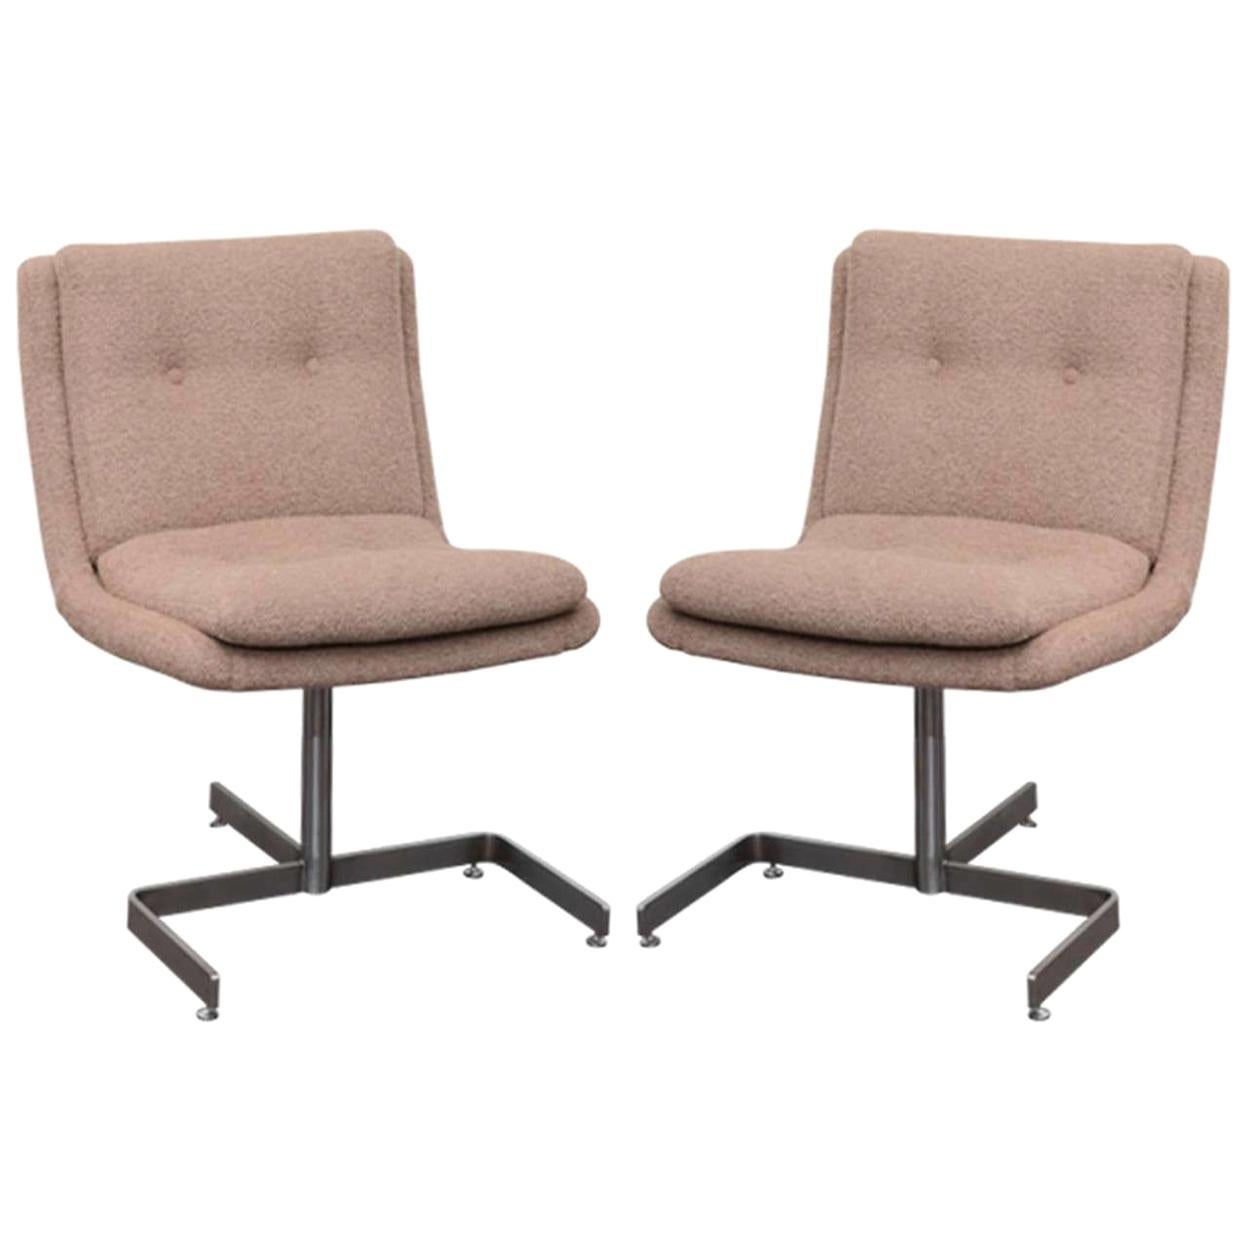 Pair of Cream Bouclé Lounge Chairs by Raphael, France, c. 1973 For Sale